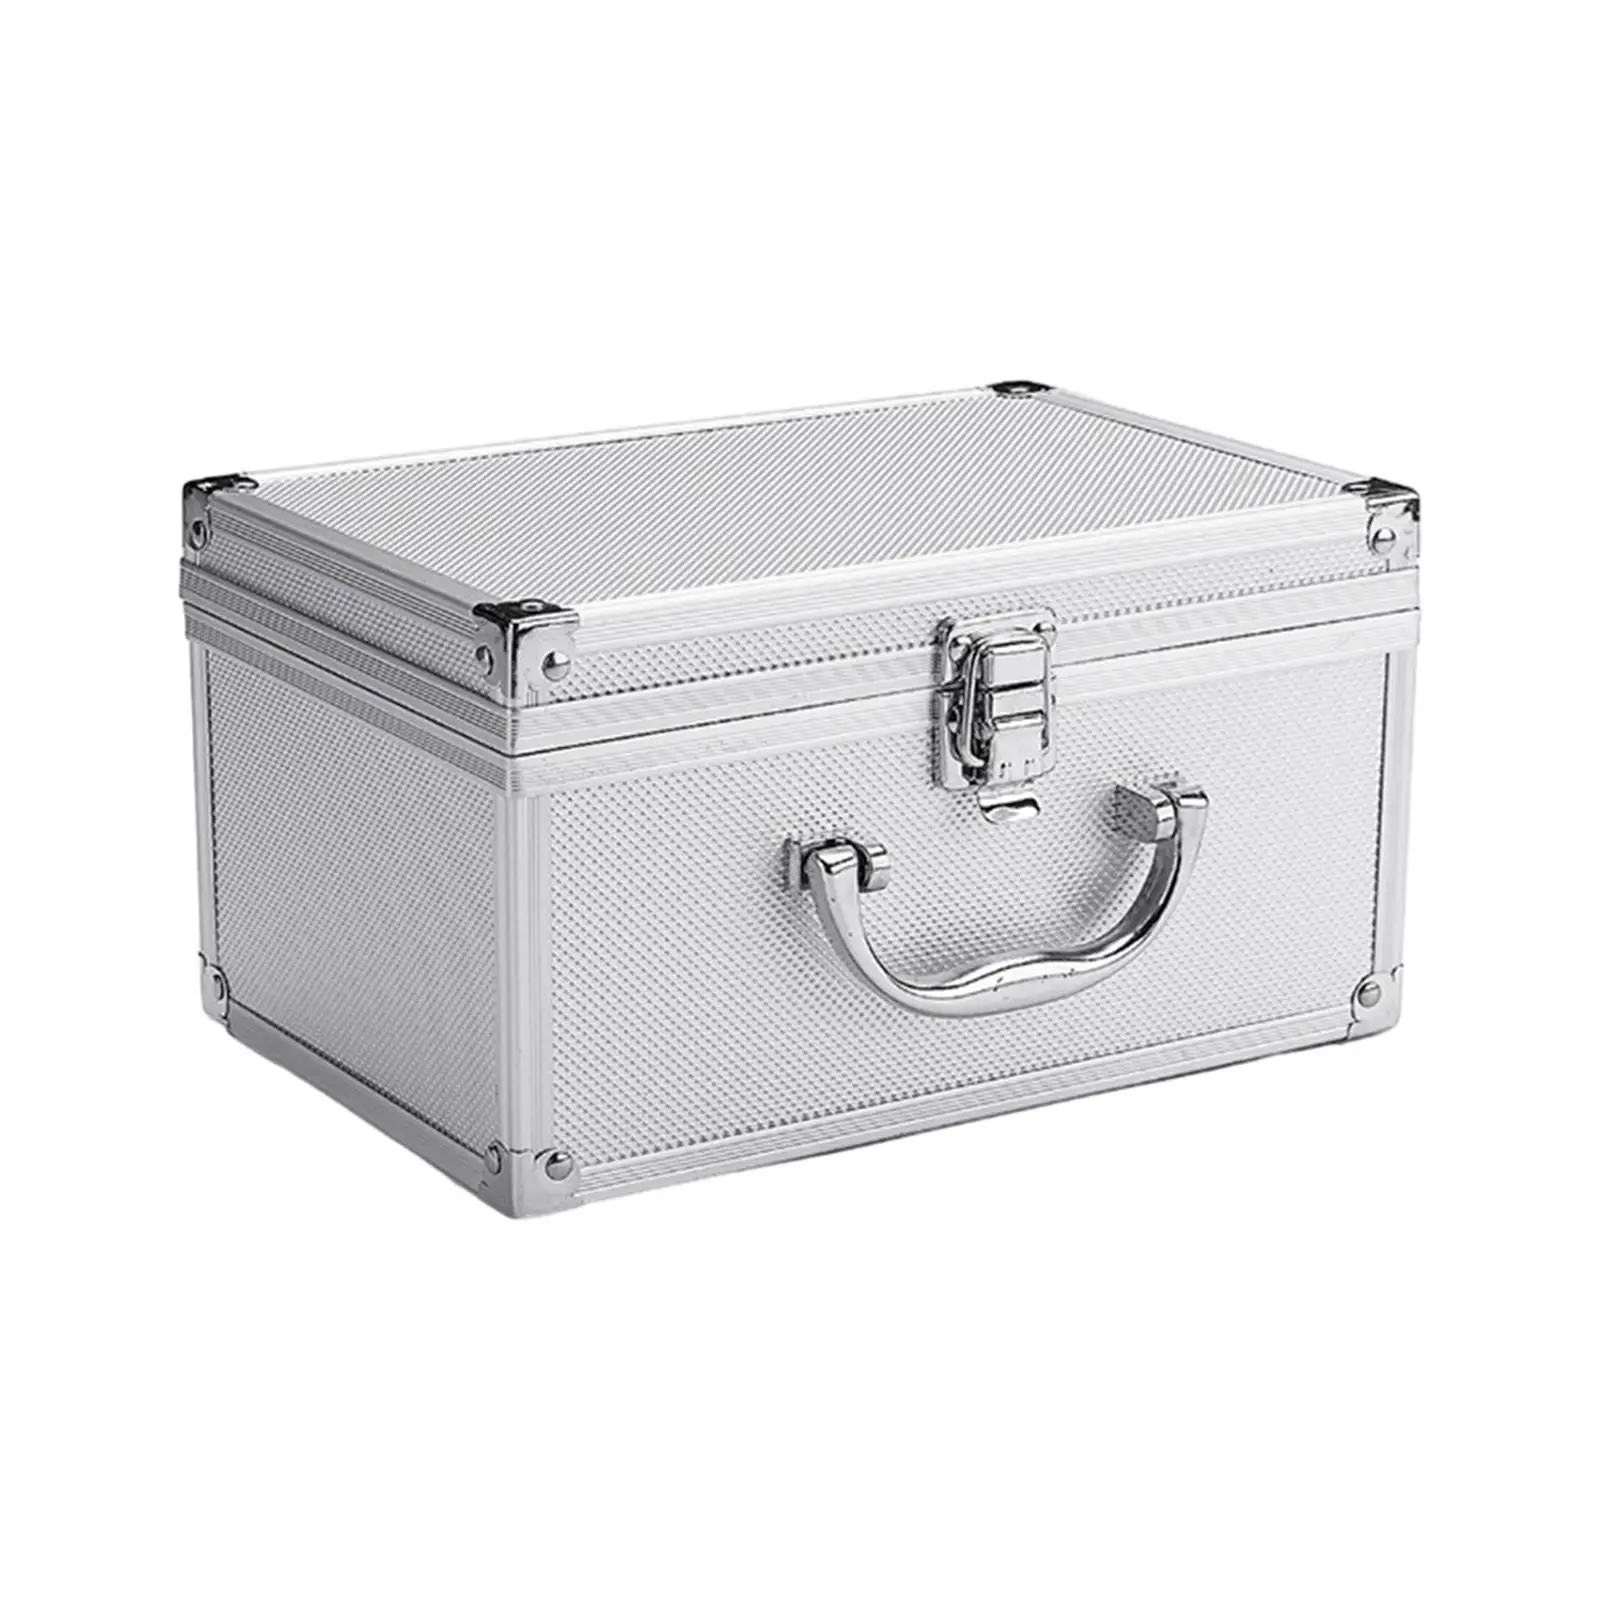 Toolbox Storage Box with Handle Equipment Box Carrying Case Screw and Nuts Hand Tools Storage for Trunk Home Garage Warehouse